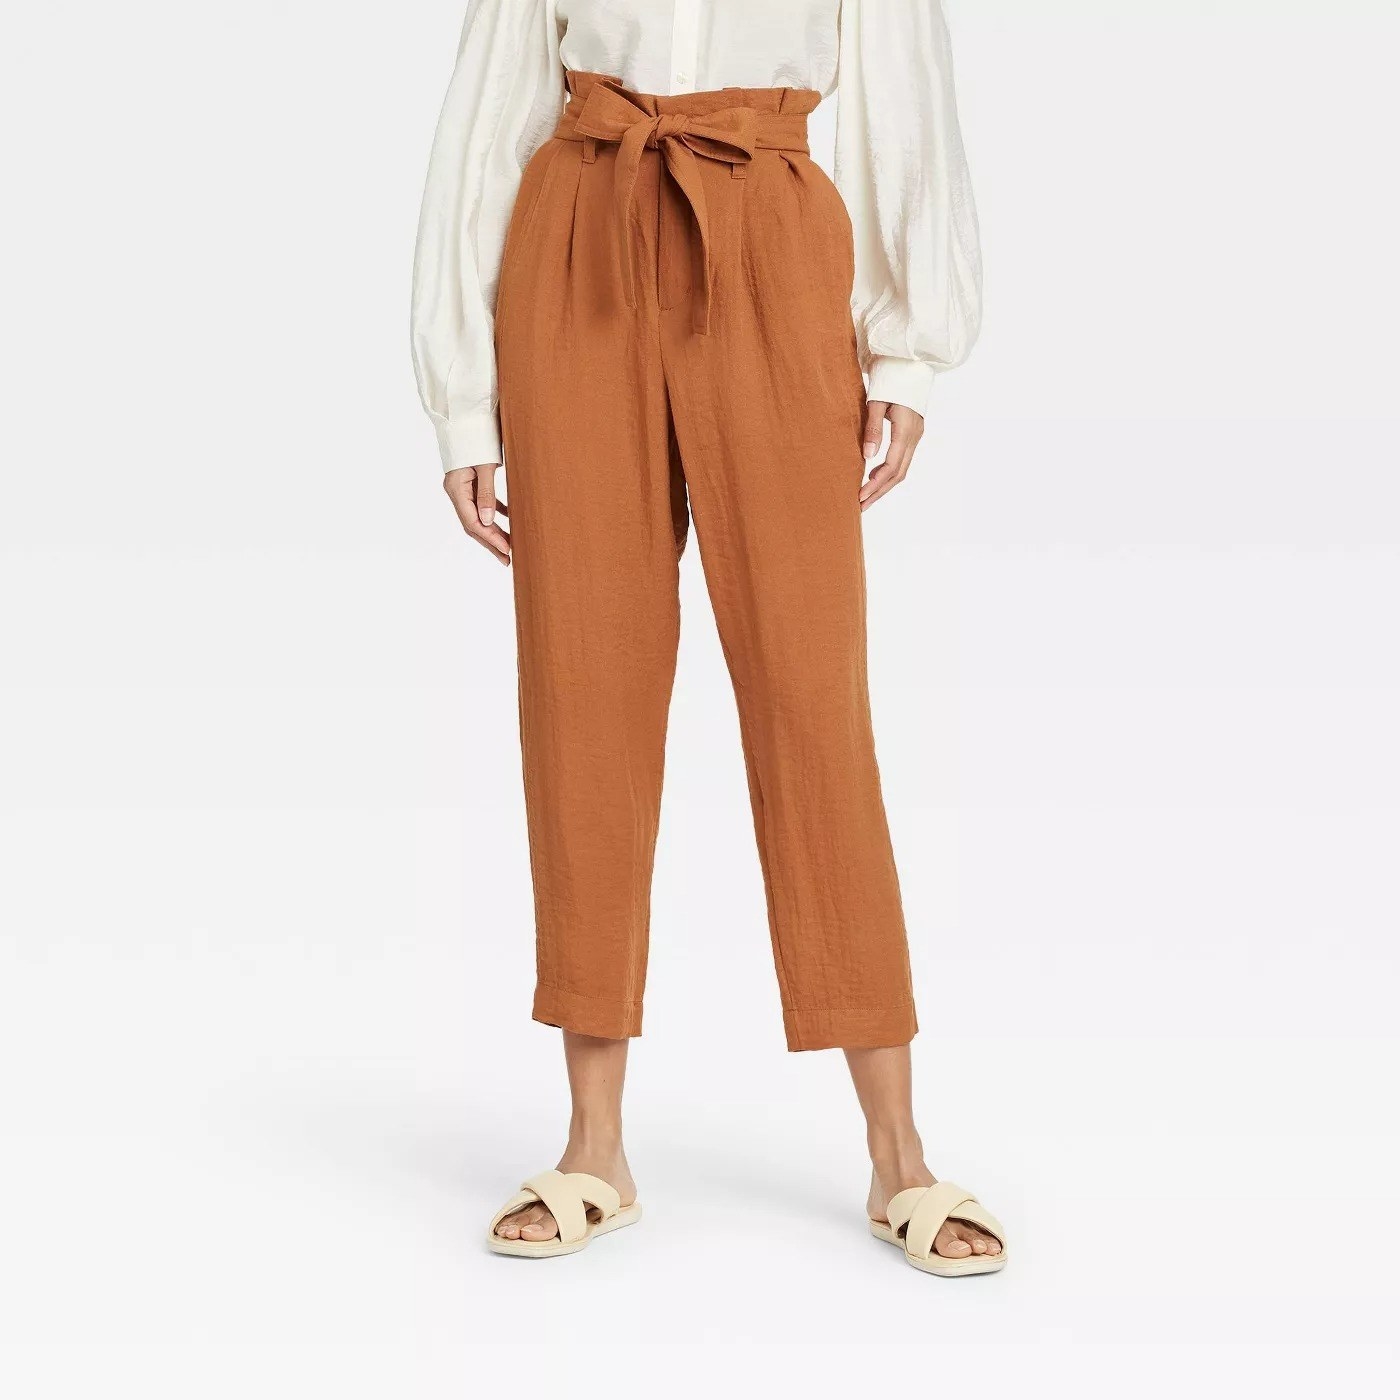 Model wearing camel high waisted pants with a tie waist, stops at the ankle